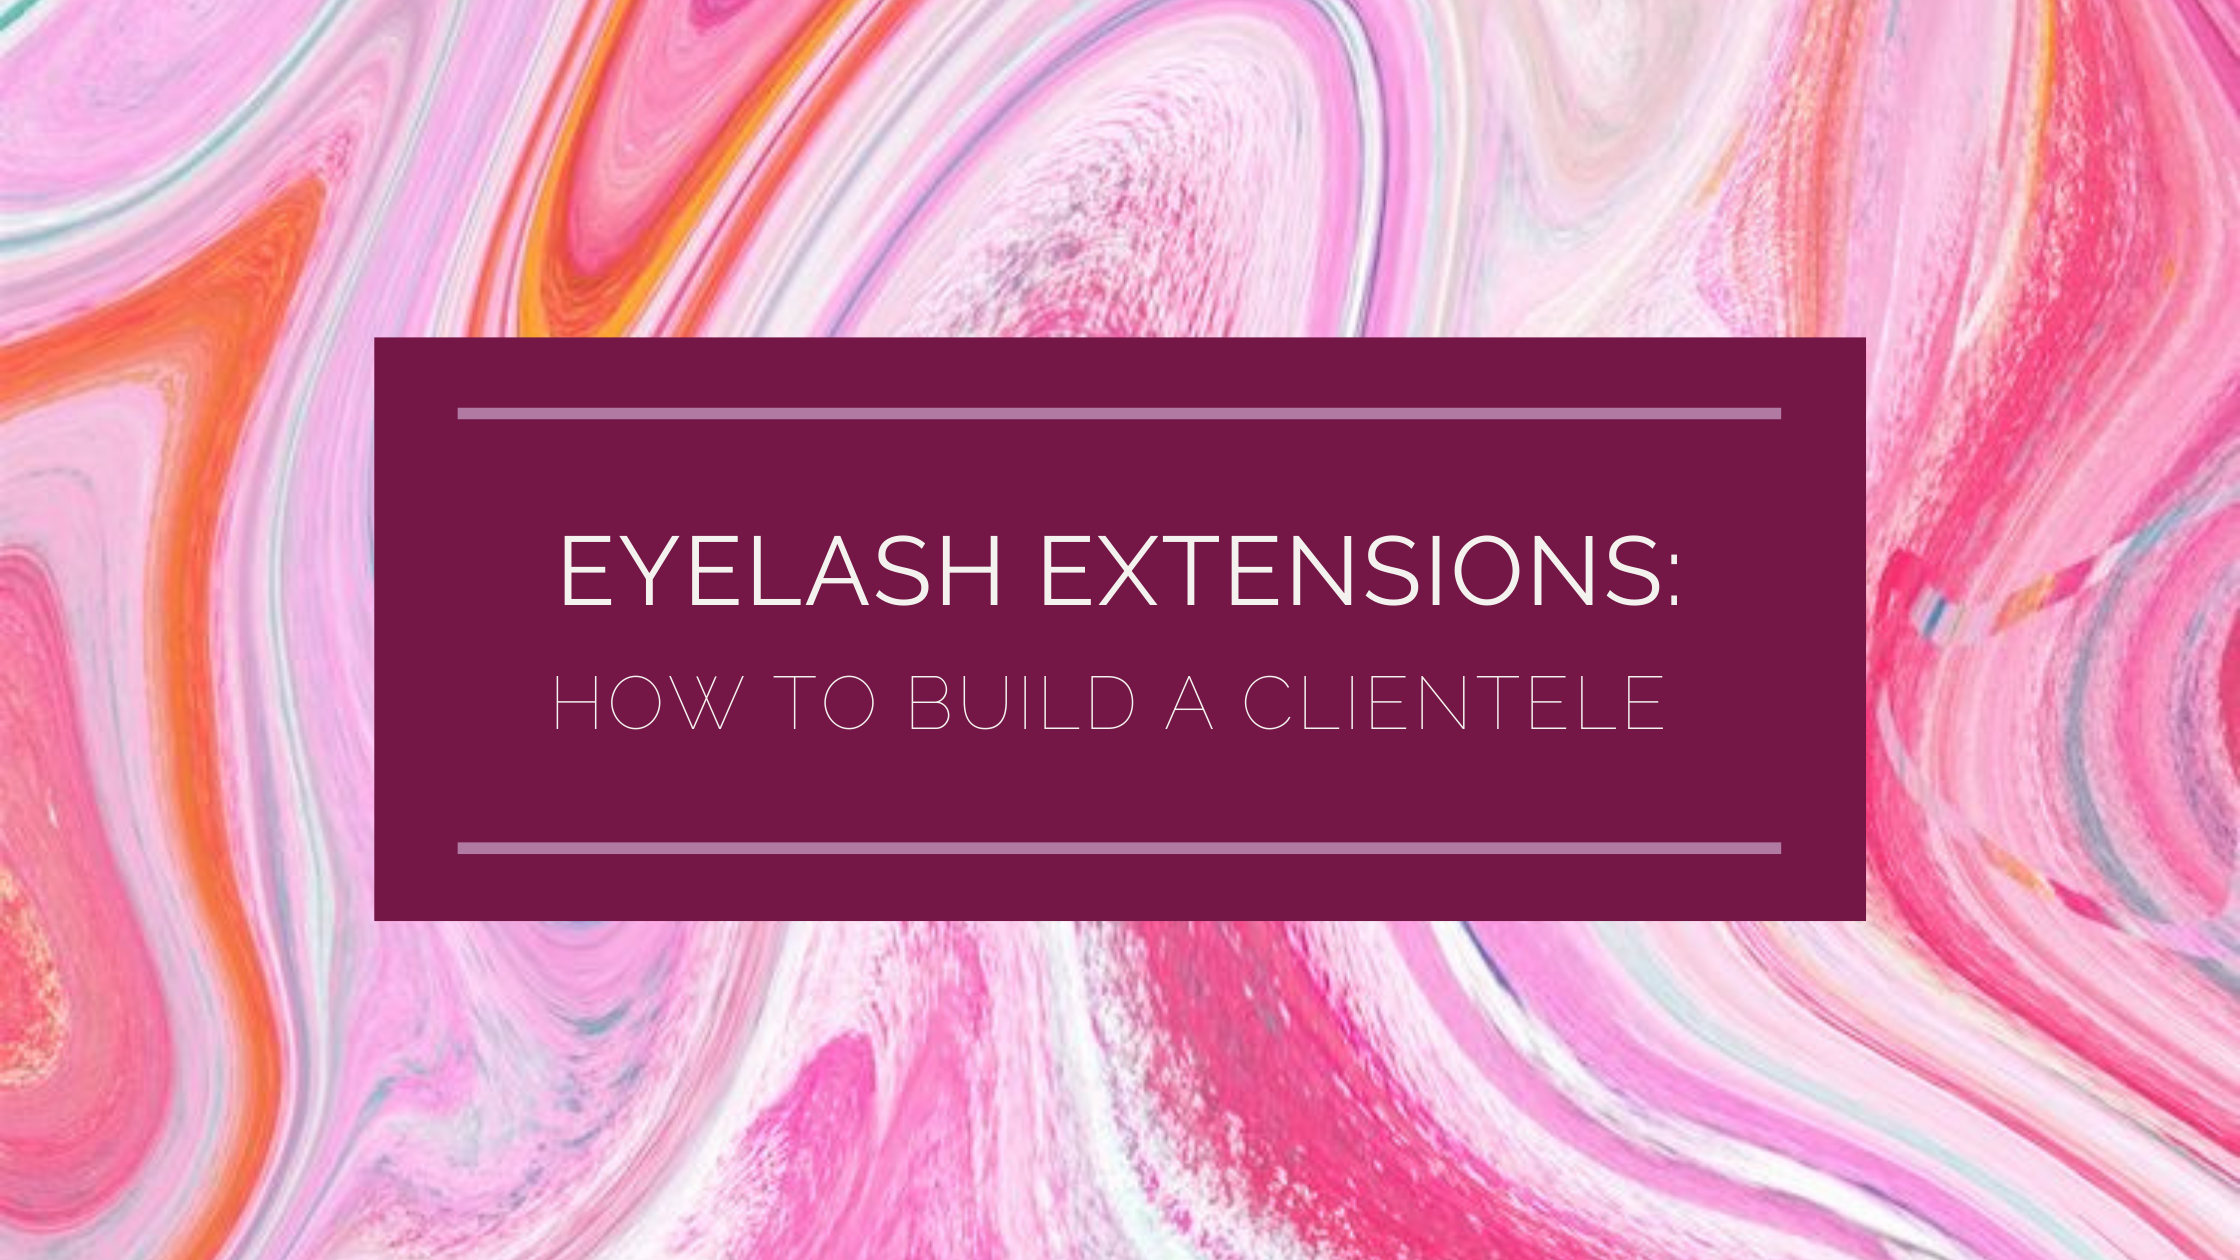 Eyelash Extensions: How to Build a Clientele